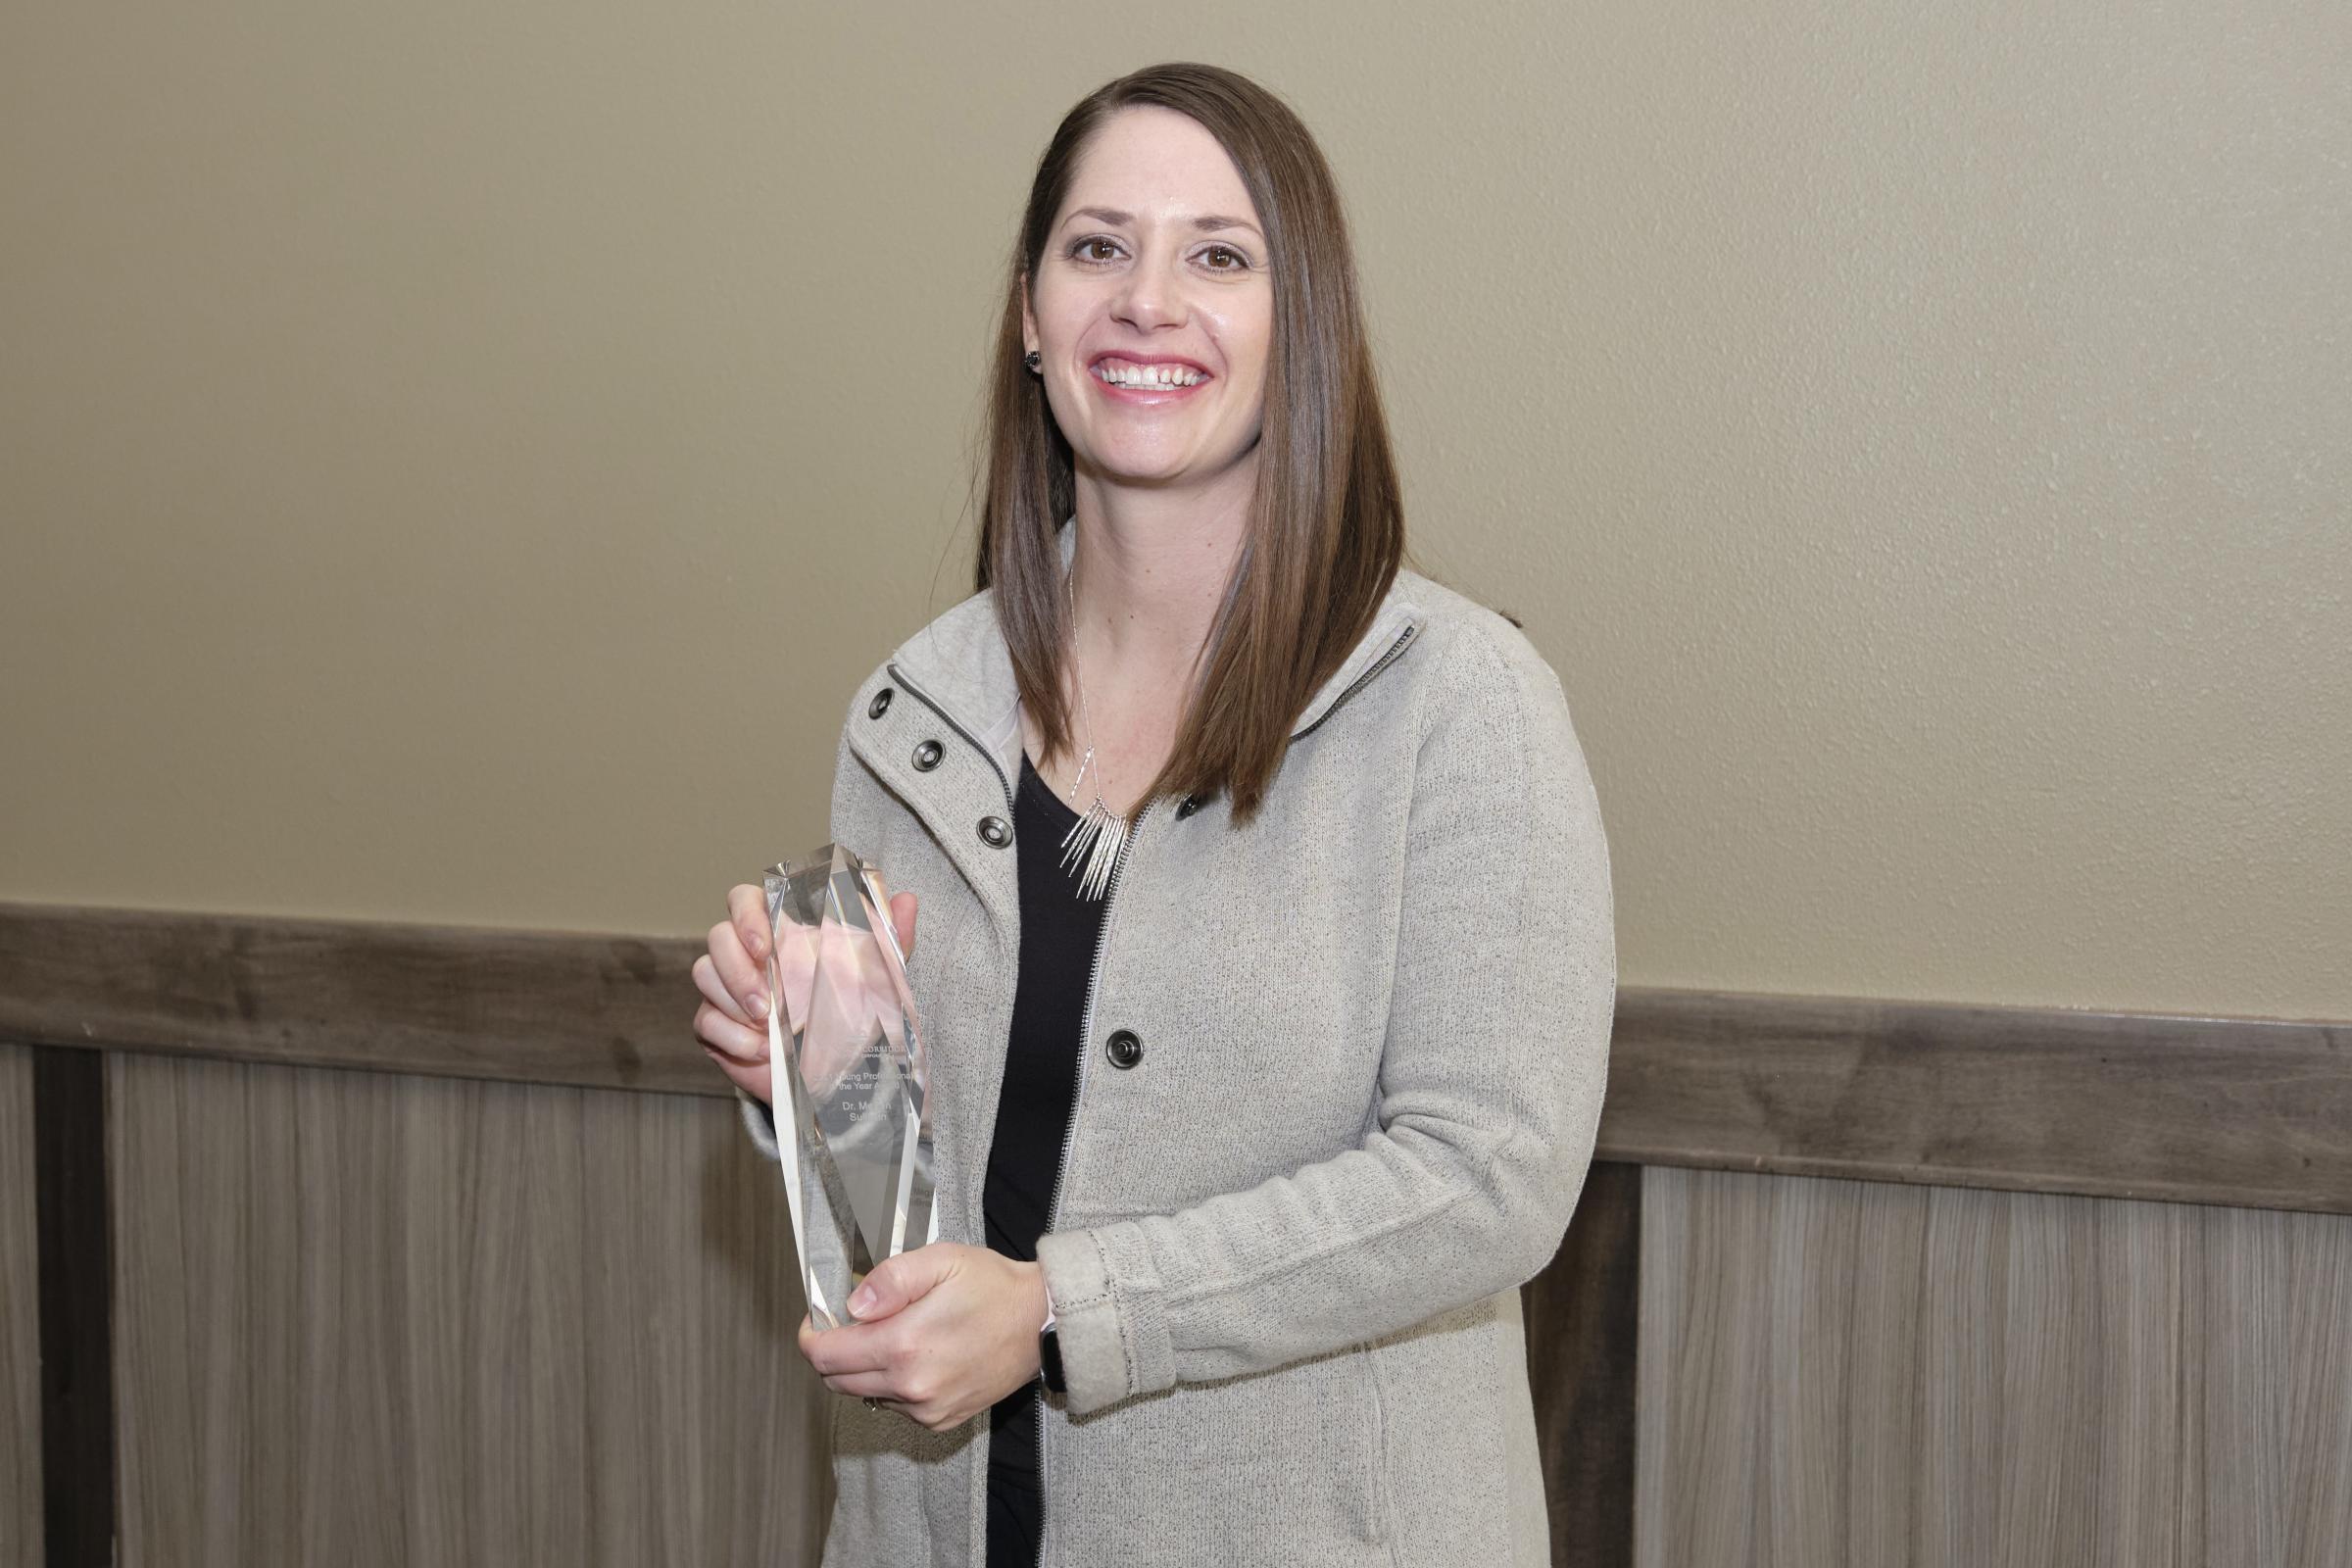 Dr. Megan Sullivan, 2021 Young Professional of the Year